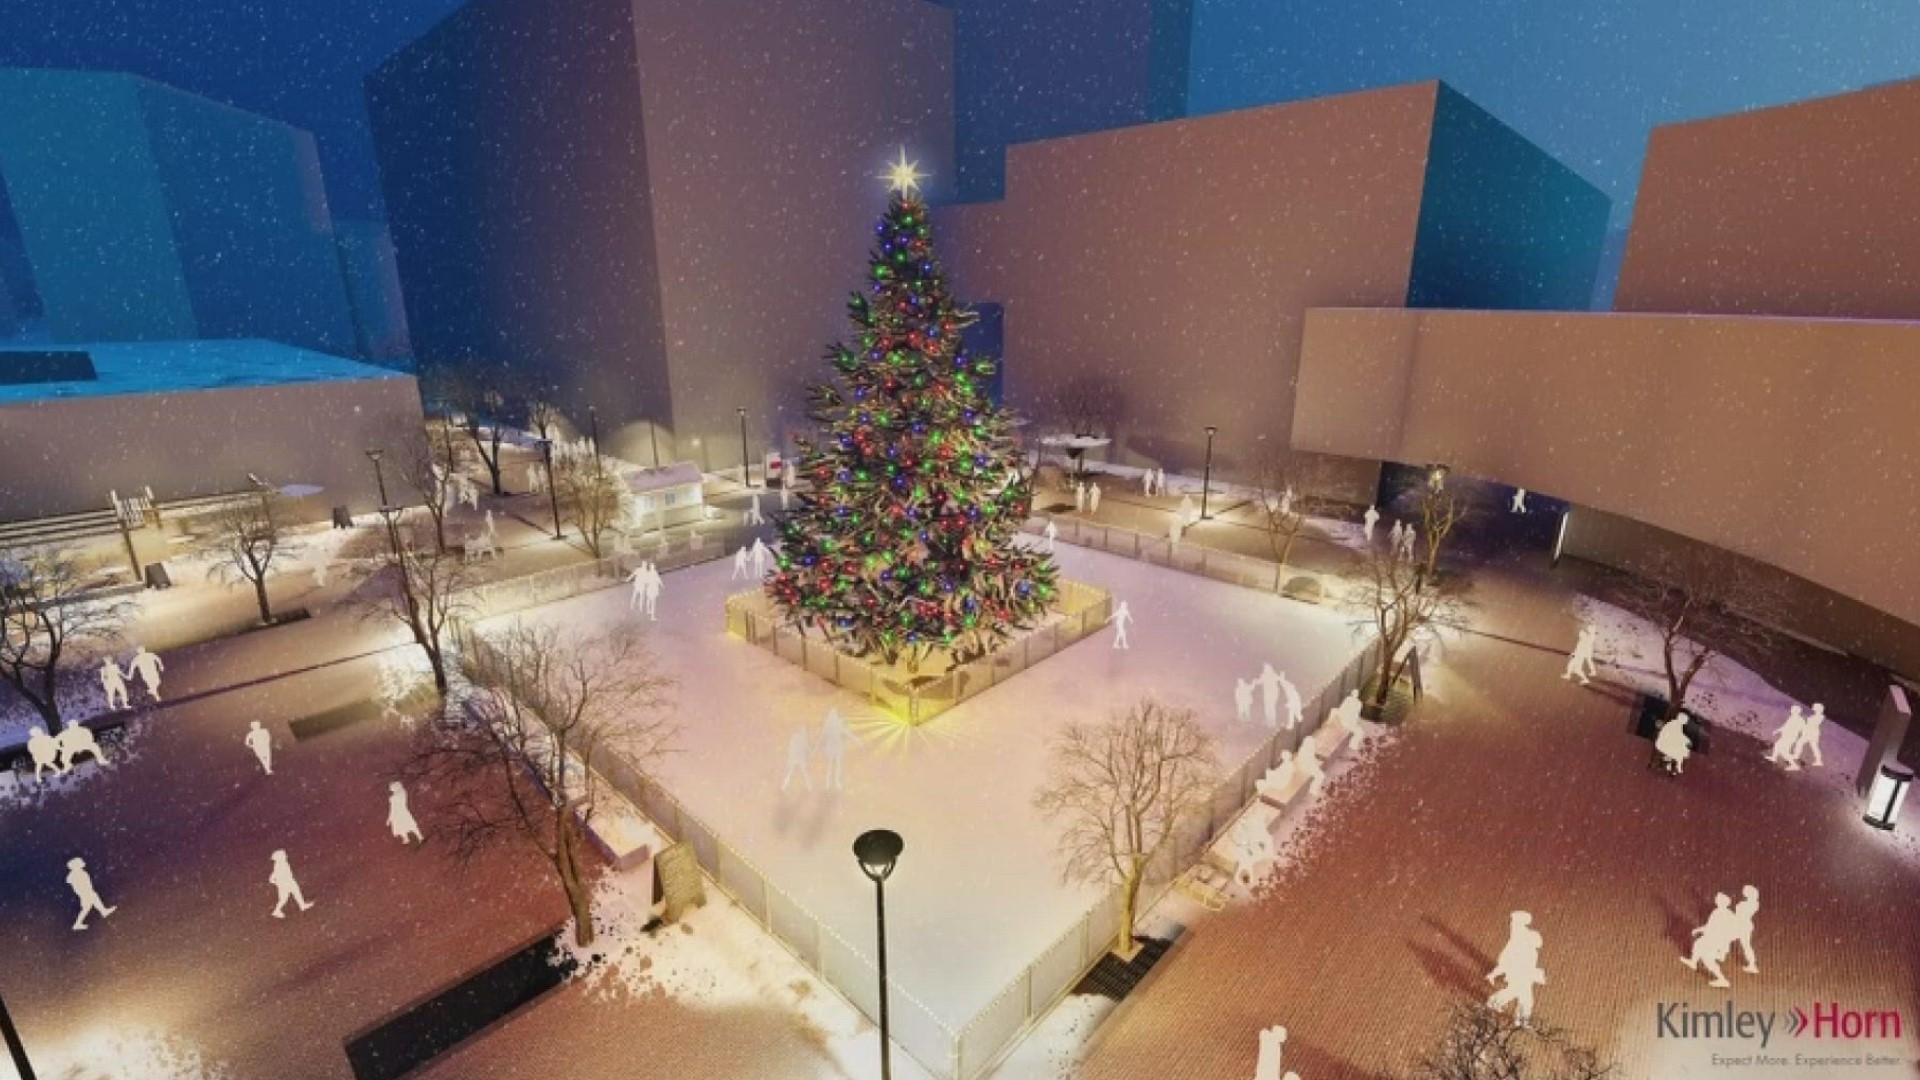 The skating rink will open the day after Thanksgiving, which is also the day after the holiday tree lighting event.